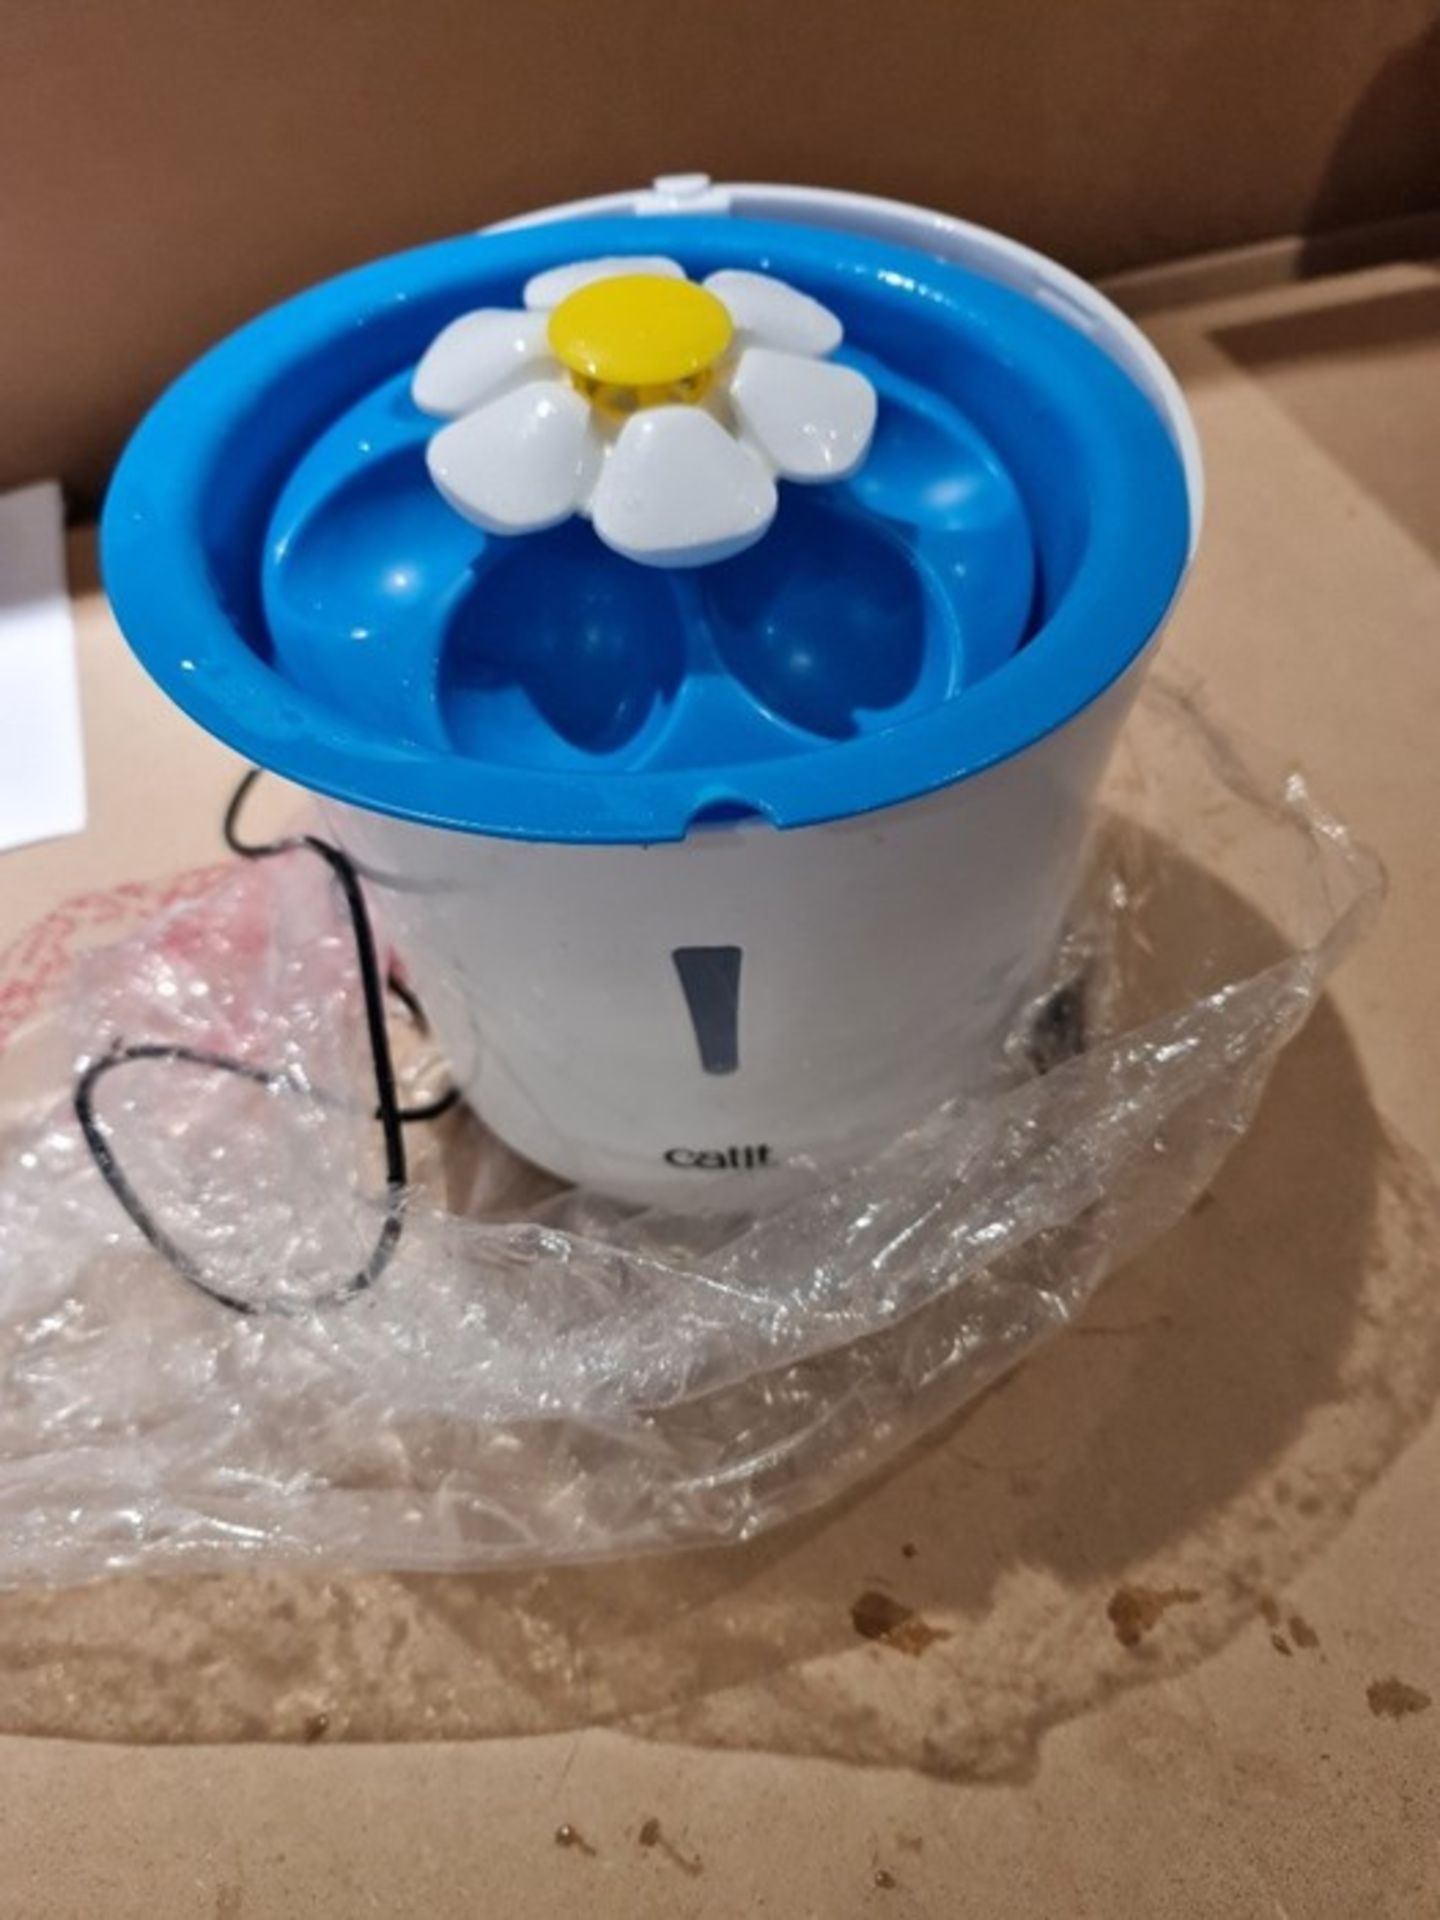 Catit Flower Drinking Fountain with LED Nightlight and Petal Top - Image 2 of 2